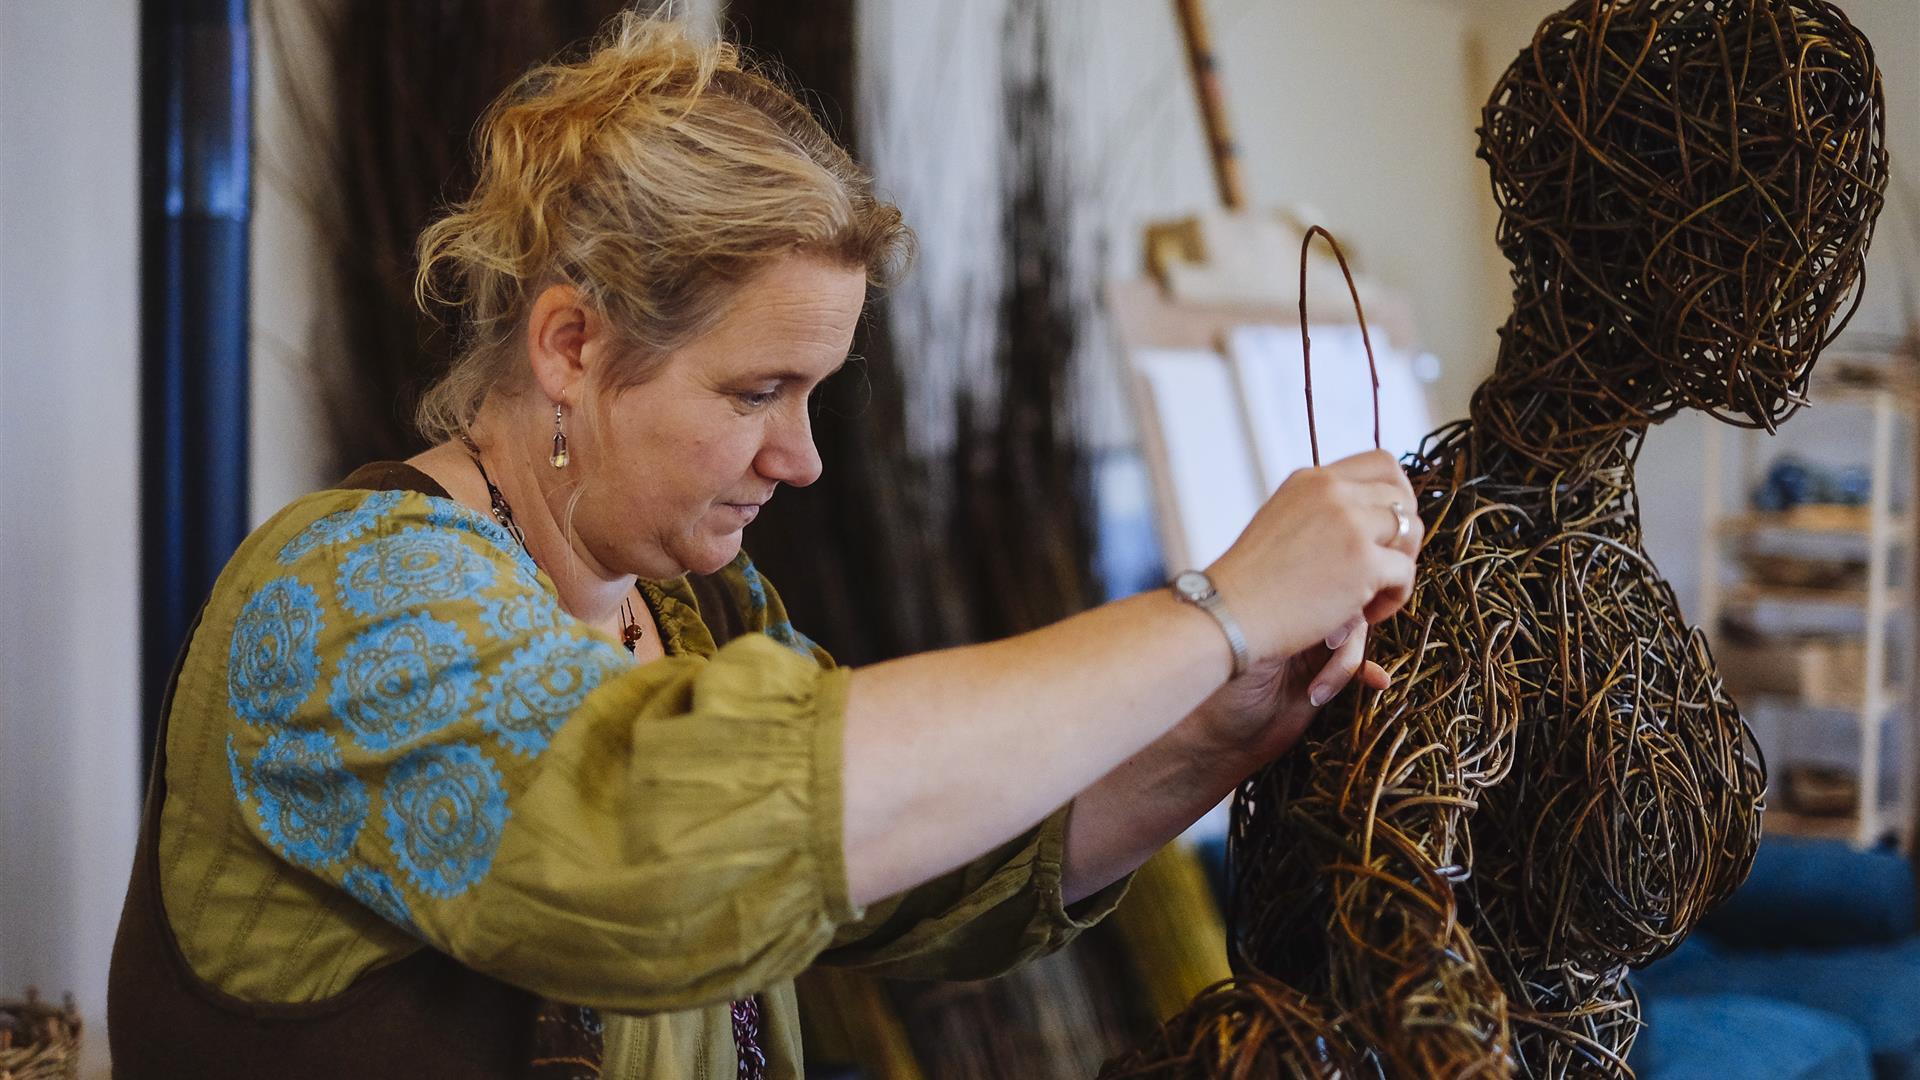 A lady at work on a weaving sculpture resembling a person